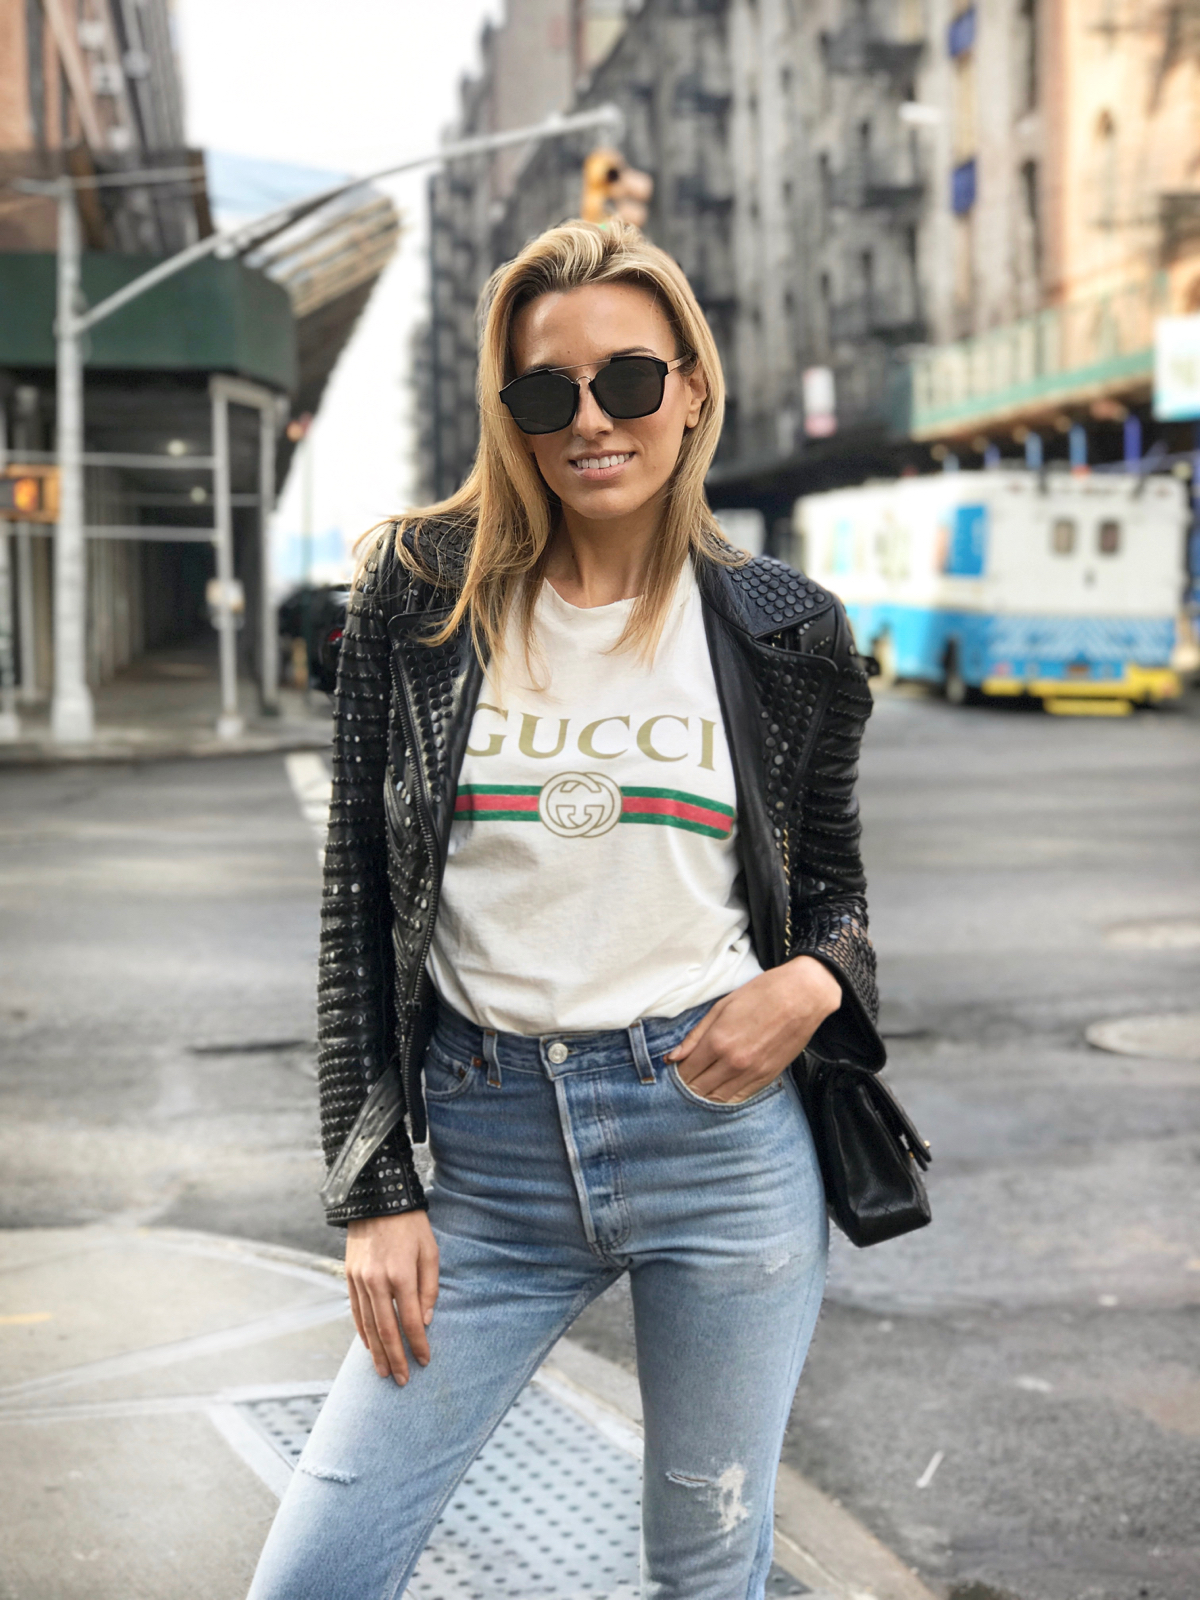 Gucci Logo tee, Gucci t shirt, Studded leather jacket, dior sunglasses, levis